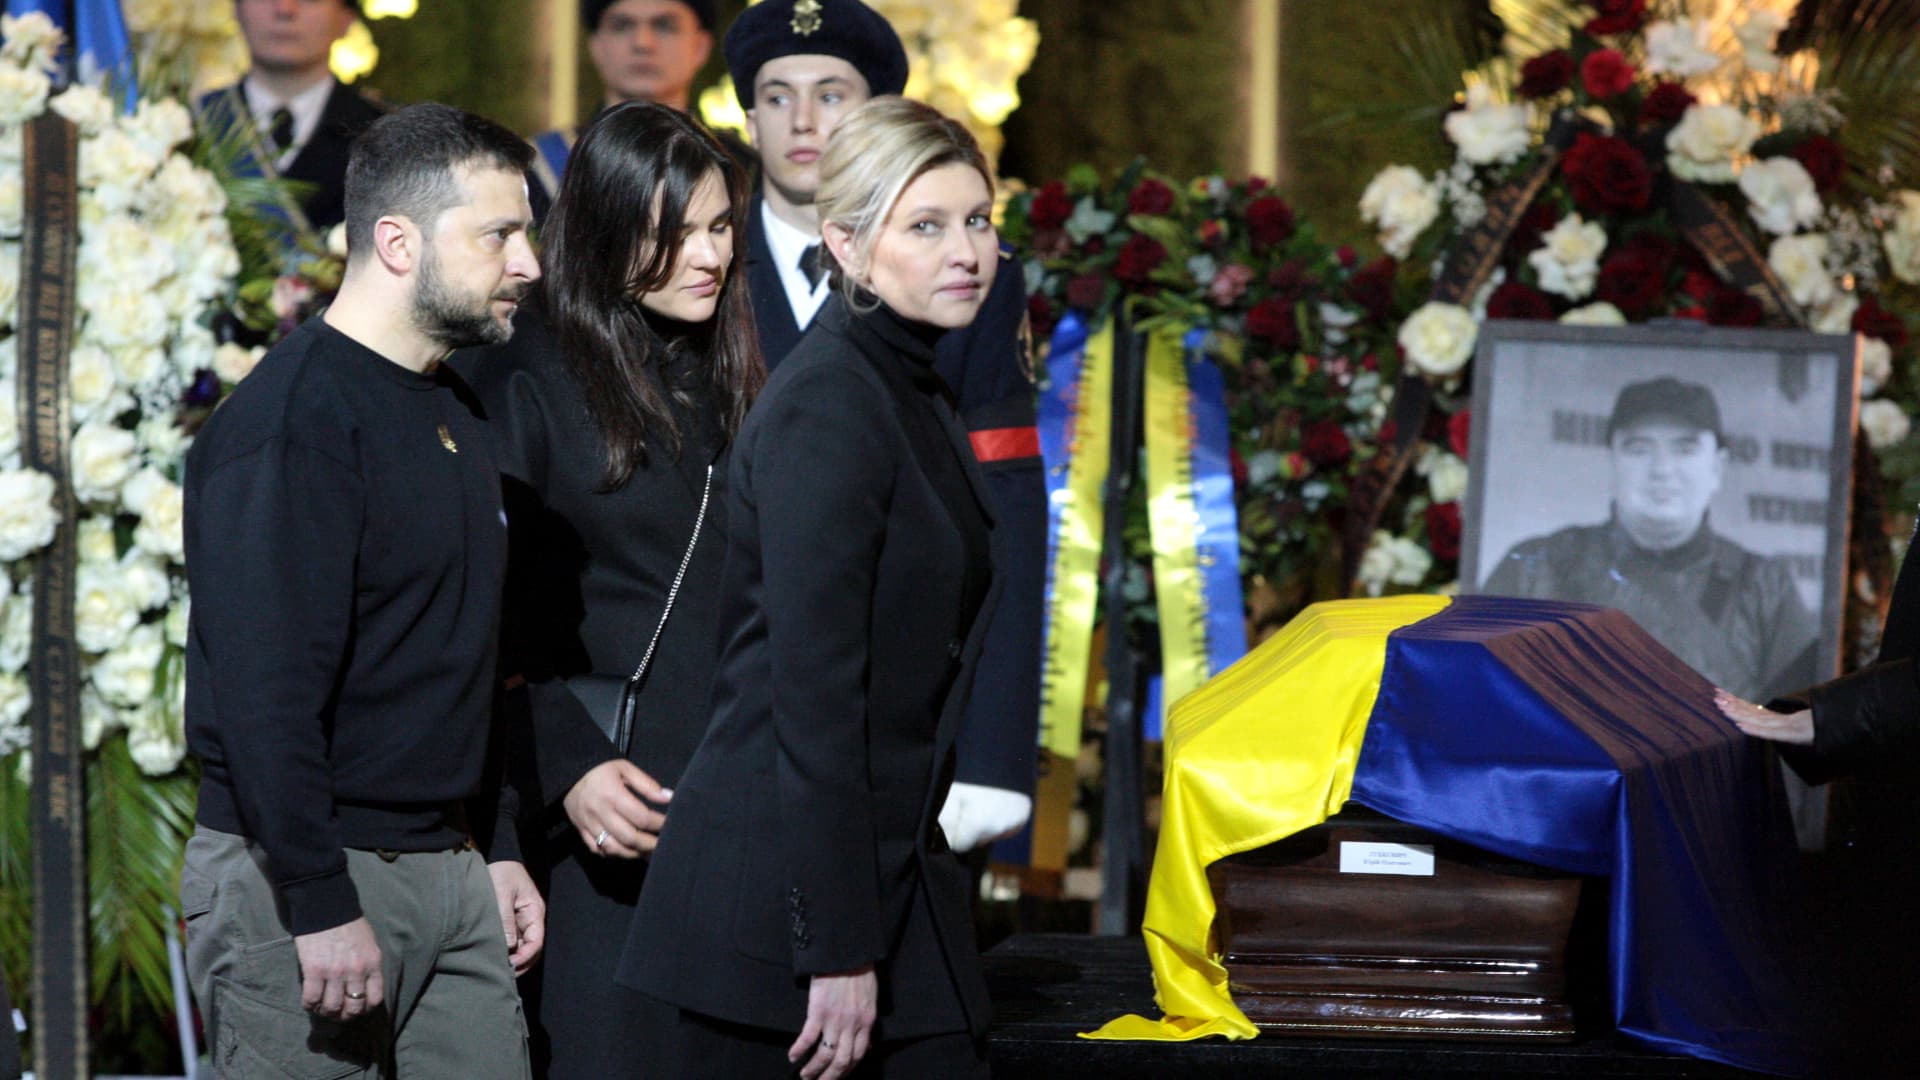 President of Ukraine Volodymyr Zelenskyy and his spouse Olena Zelenska pay their last respects to the leadership of the Ukrainian Ministry of Internal Affairs who perished in the Brovary helicopter crash during the lying-in-state ceremony at the Ukrainian House, Kyiv, capital of Ukraine. On Wednesday morning, January 18, a helicopter of the State Emergency Service crashed near a kindergarten and a residential building in Brovary, Kyiv Region.